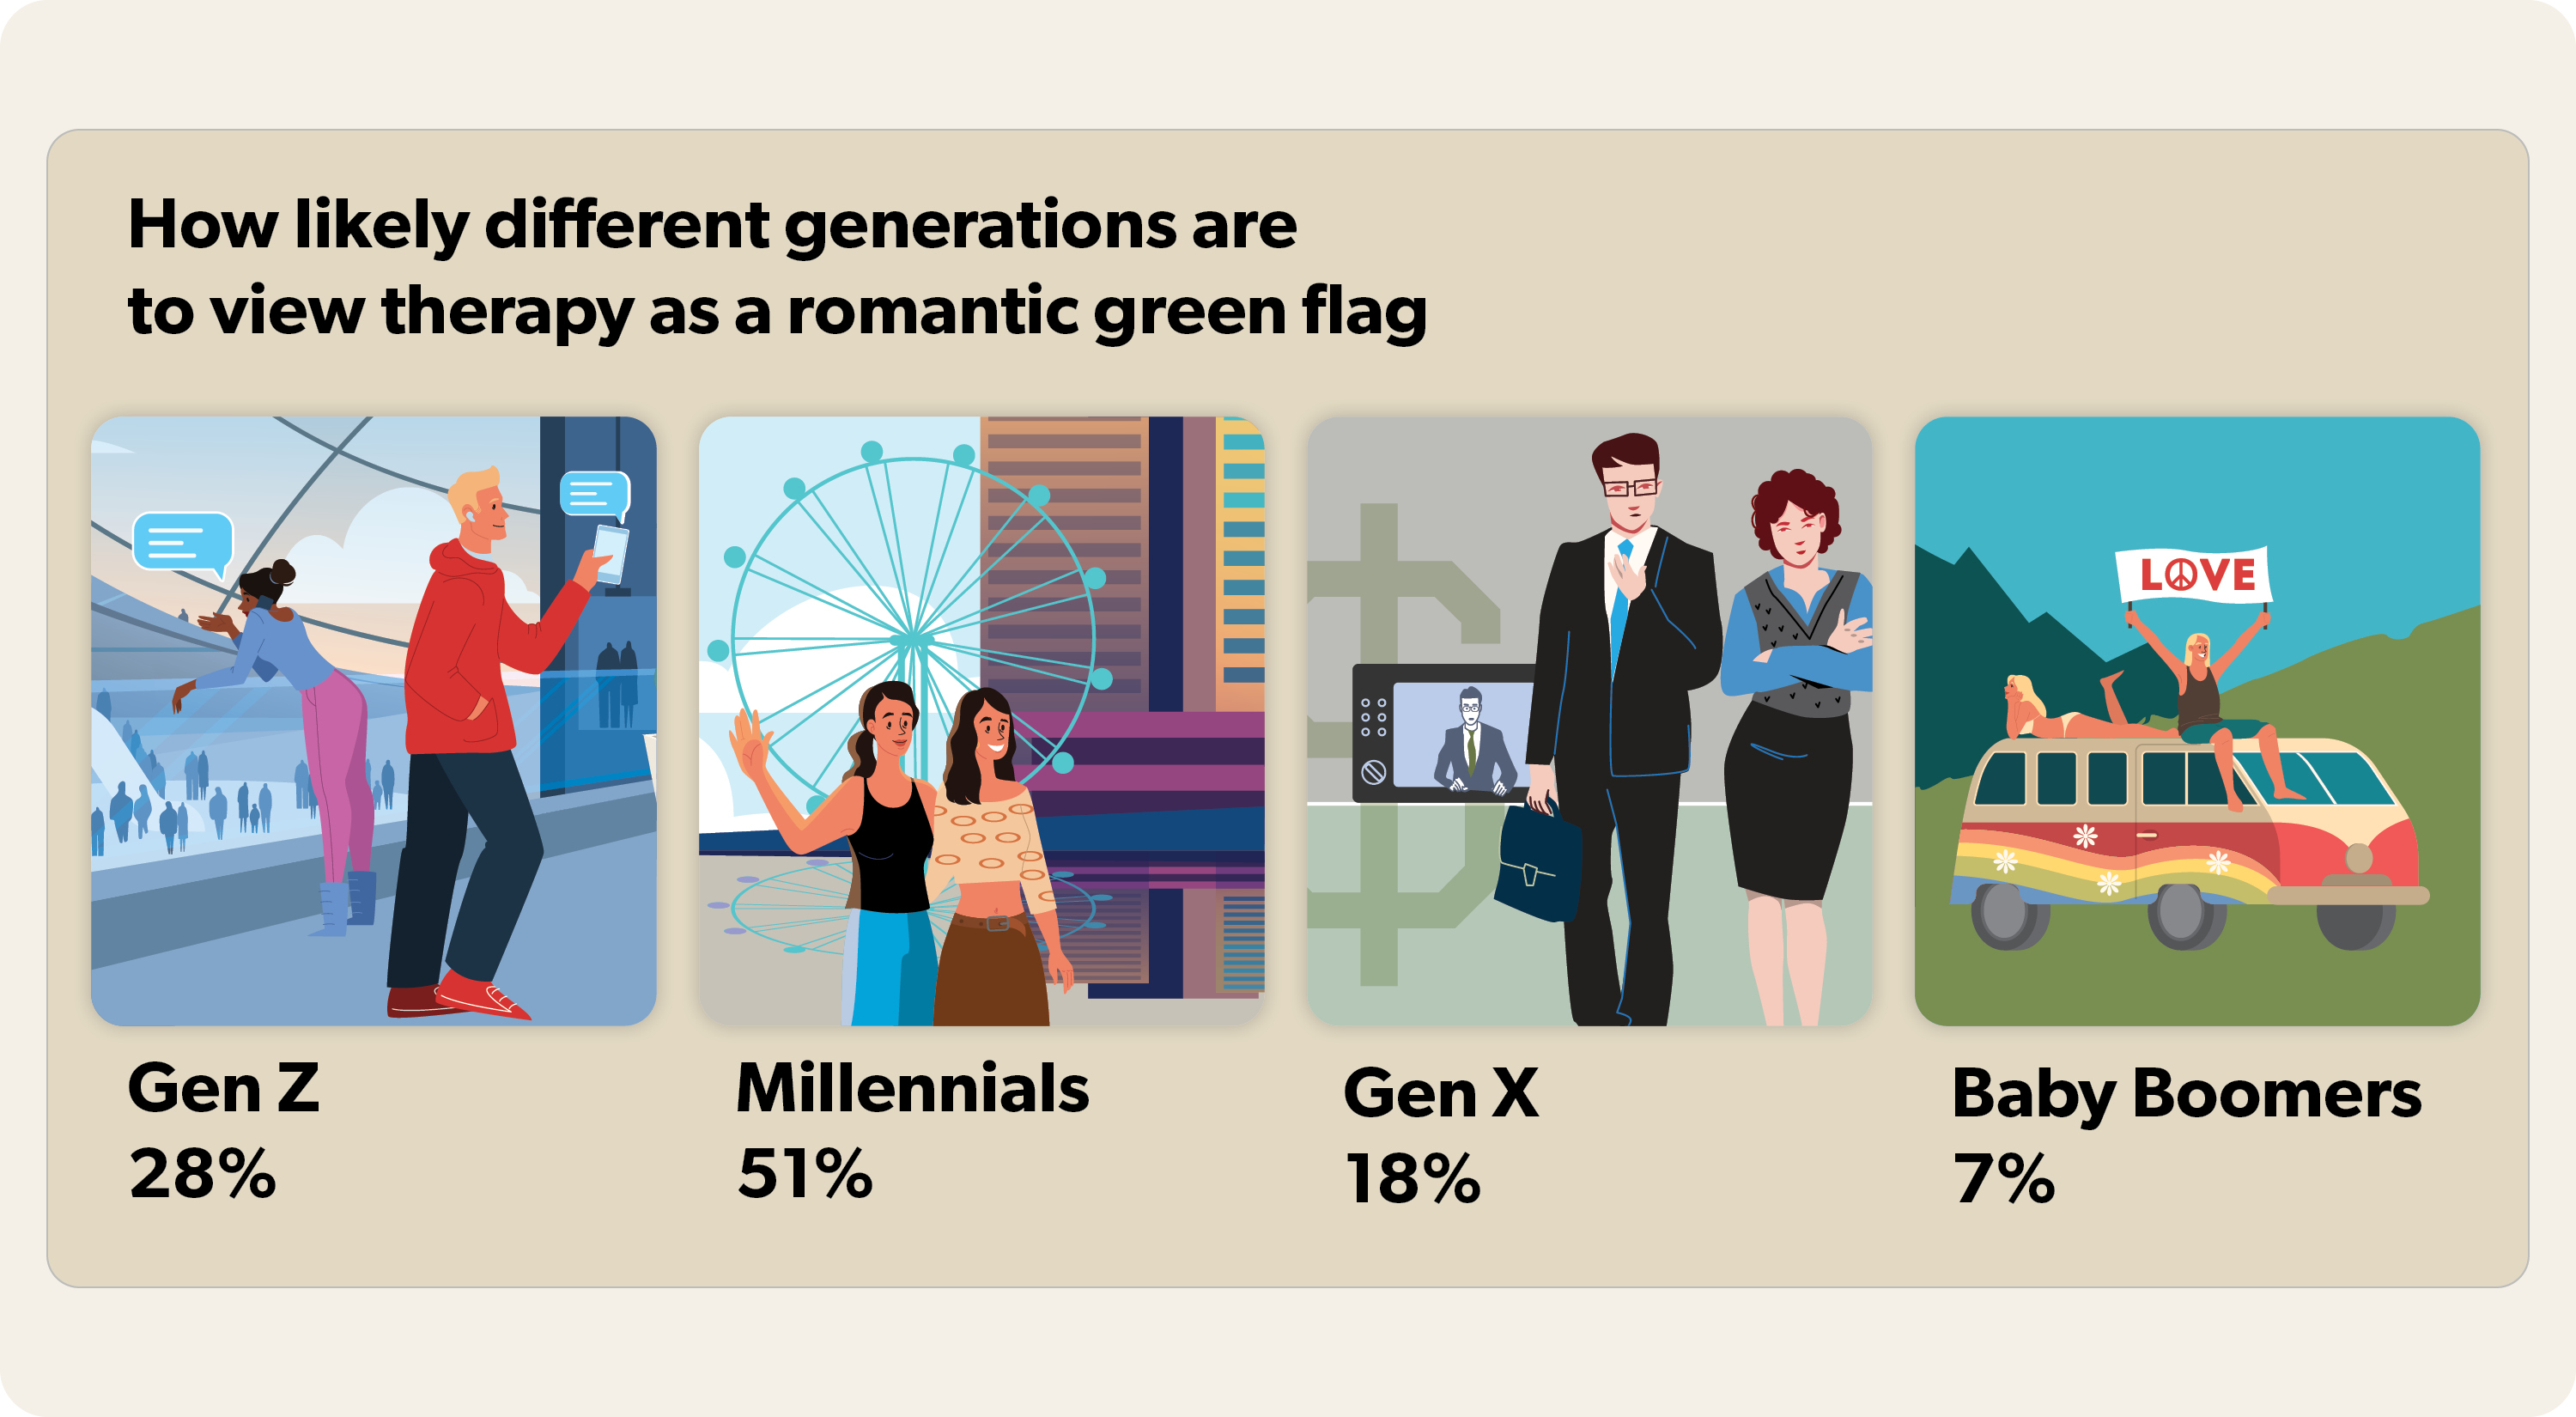 28% of Gen Z and 51% of Millennials see therapy as a dating green flag, while 18% of Gen X and 7% of Baby Boomers think the same.